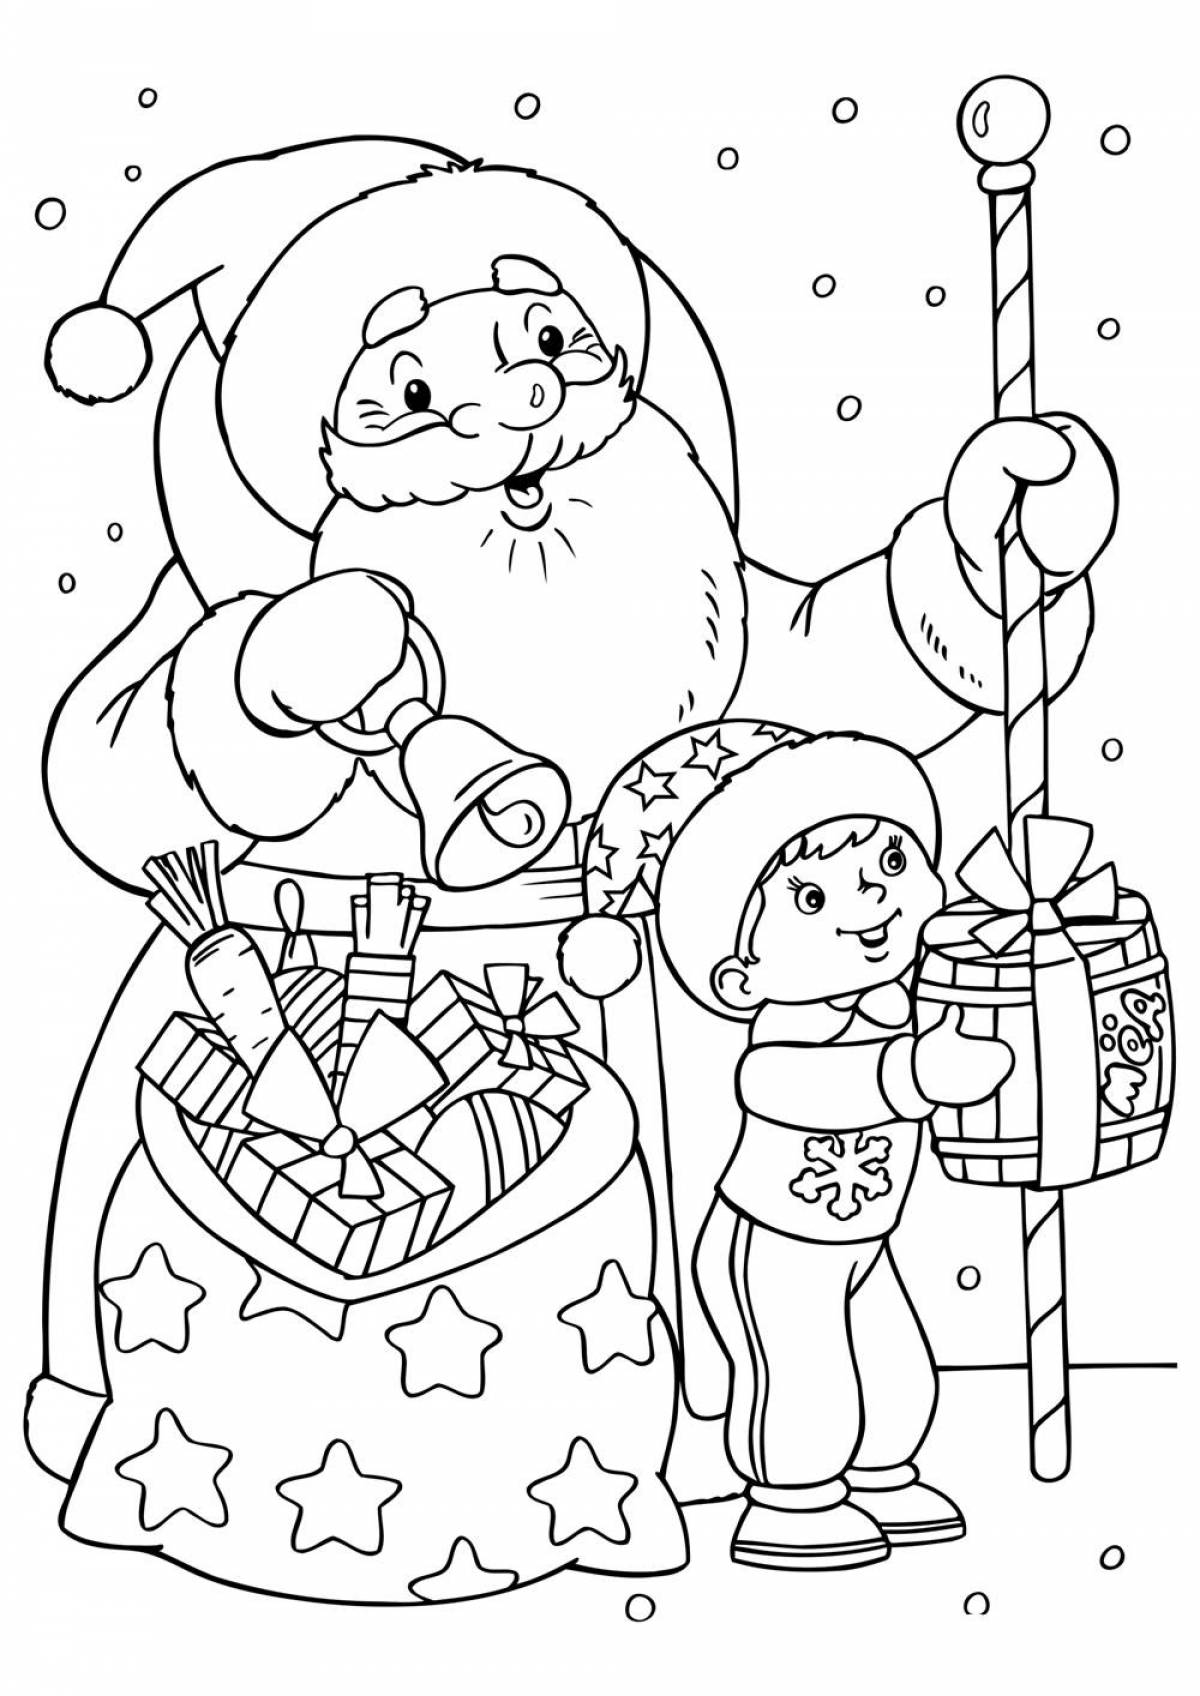 Coloring Christmas pictures for kids